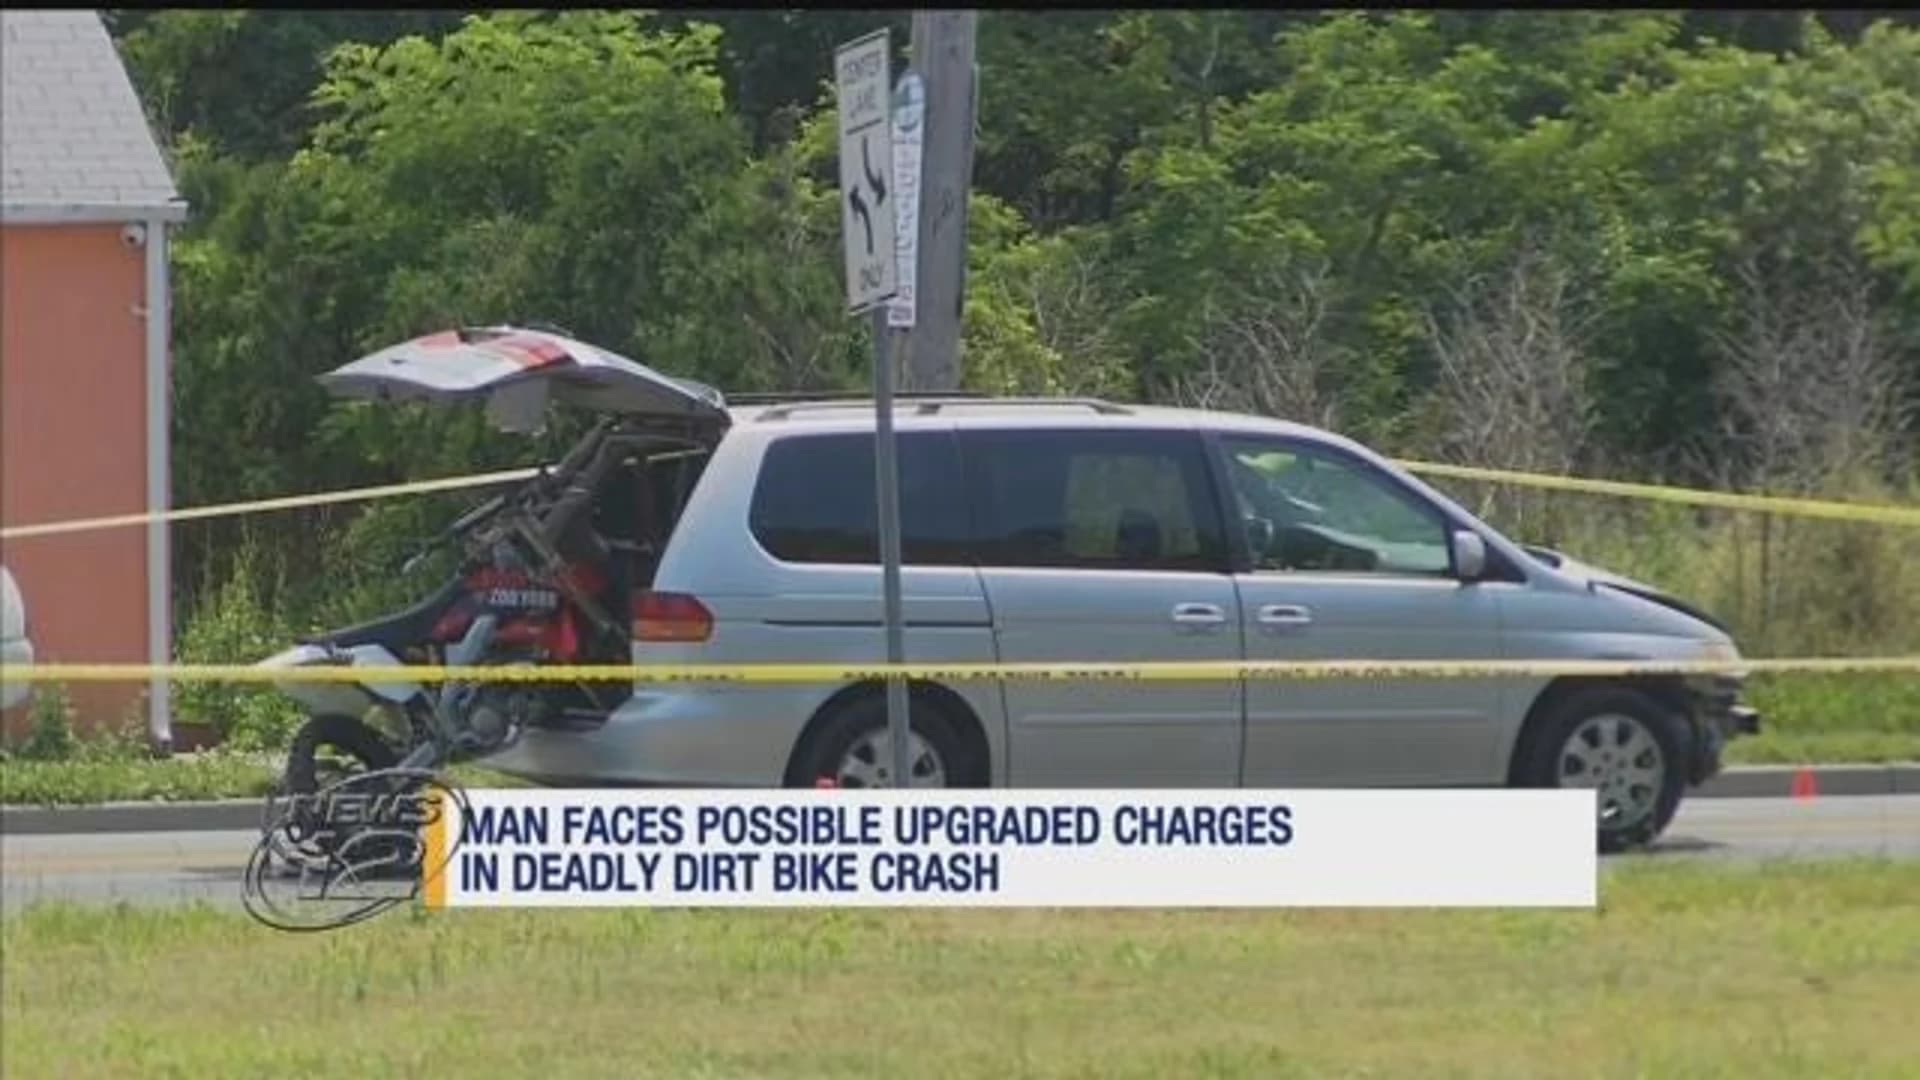 Man facing possible upgraded charges in deadly dirt bike crash